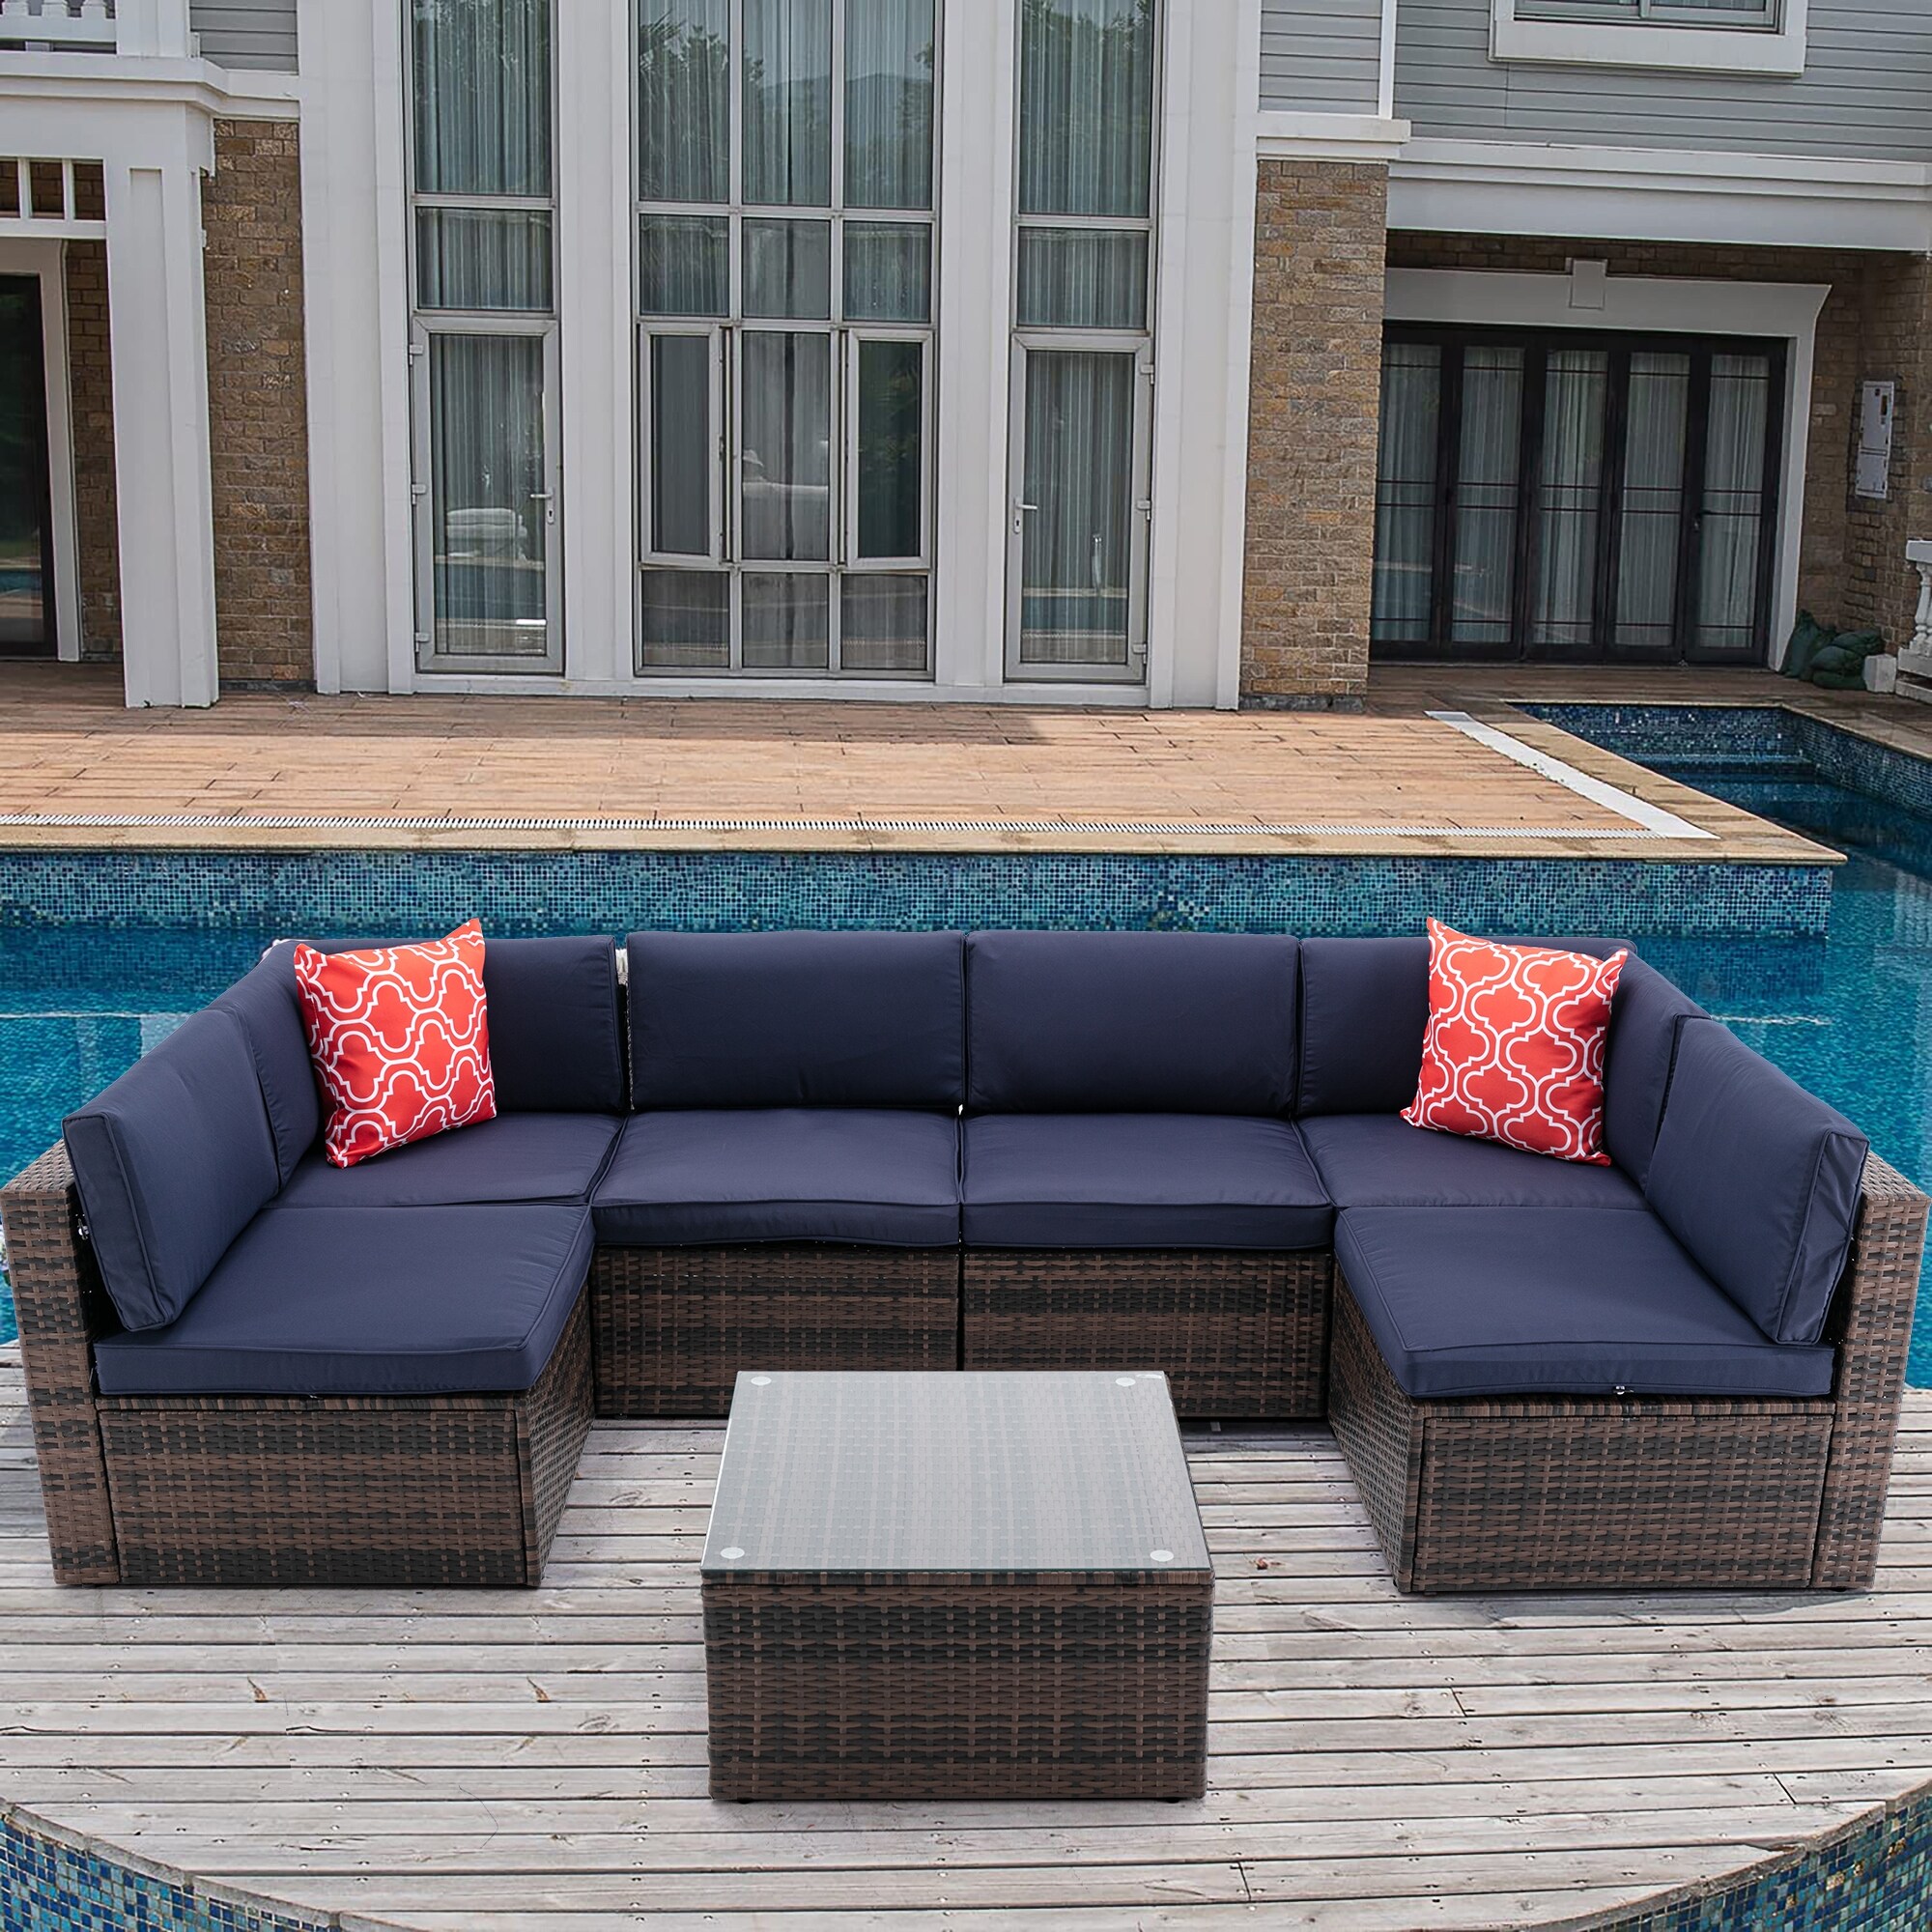 7-piece Outdoor Garden Patio Furniture Set With Pe Rattan Wicker Sectional Sofa  Cushions  And Coffee Table